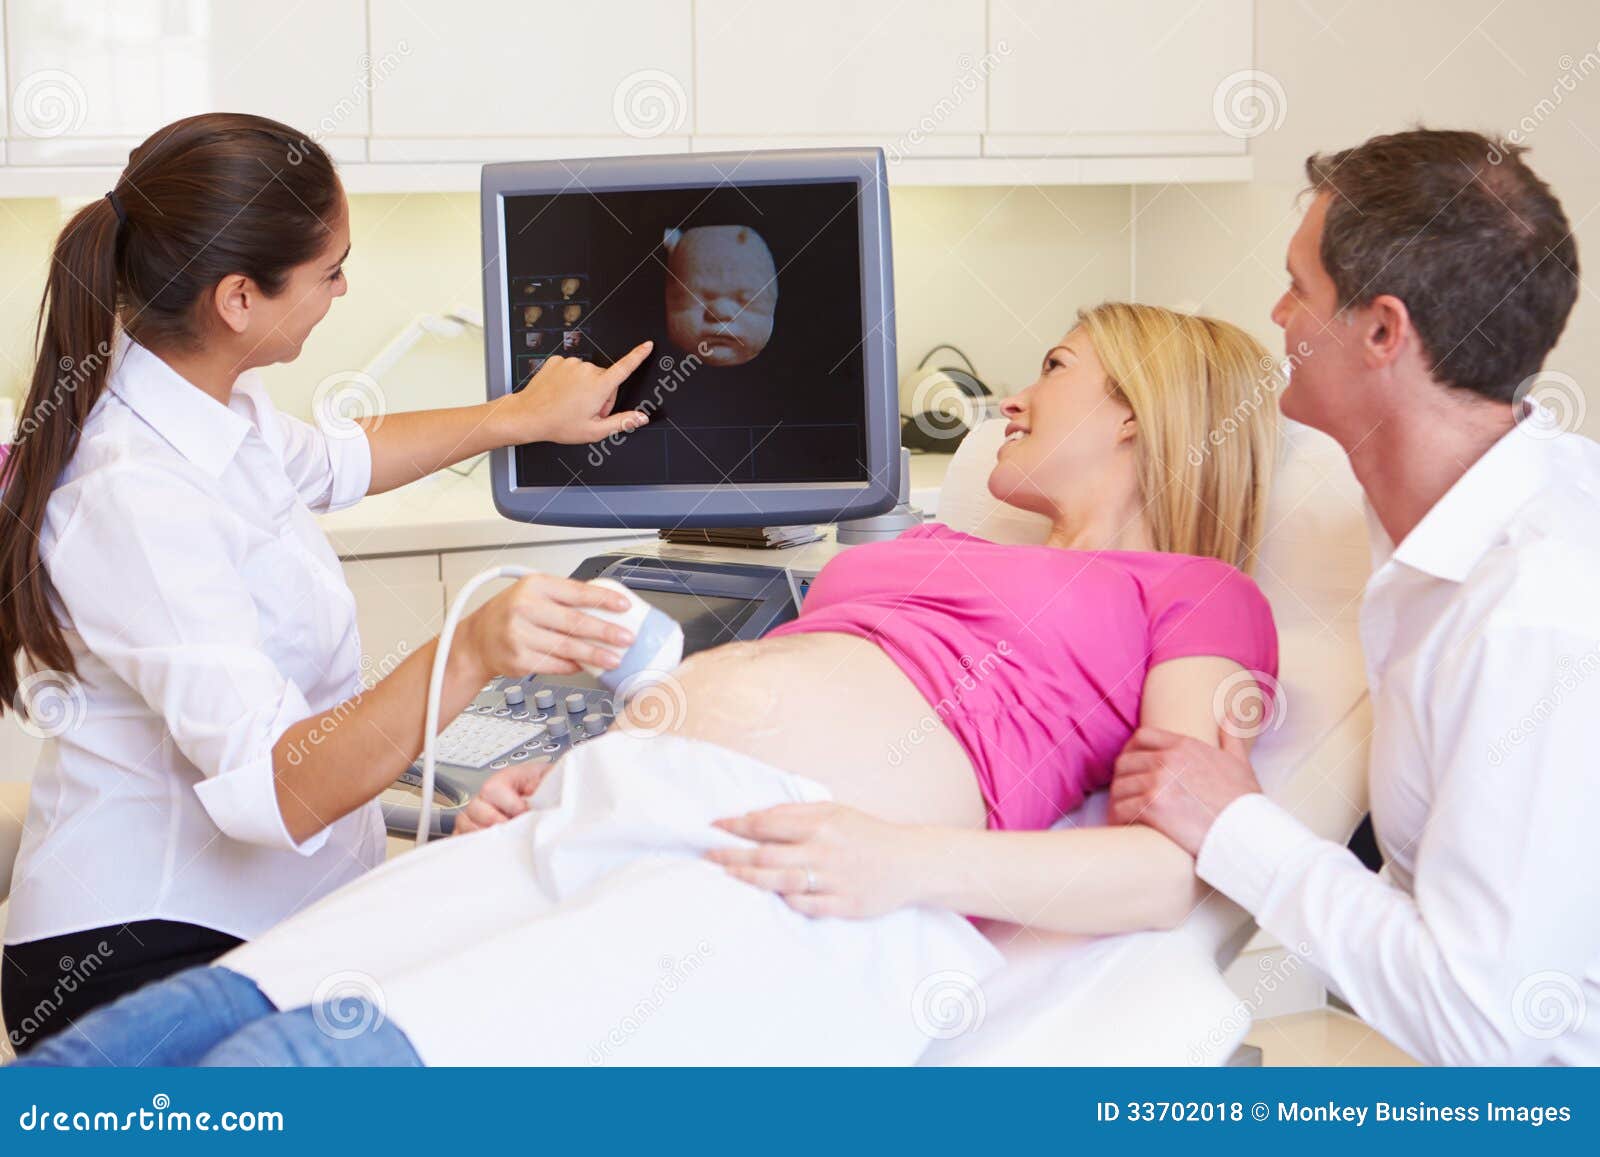 Pregnant Woman and Partner Having Ultrasound Scan Photo - of excitement, clinic: